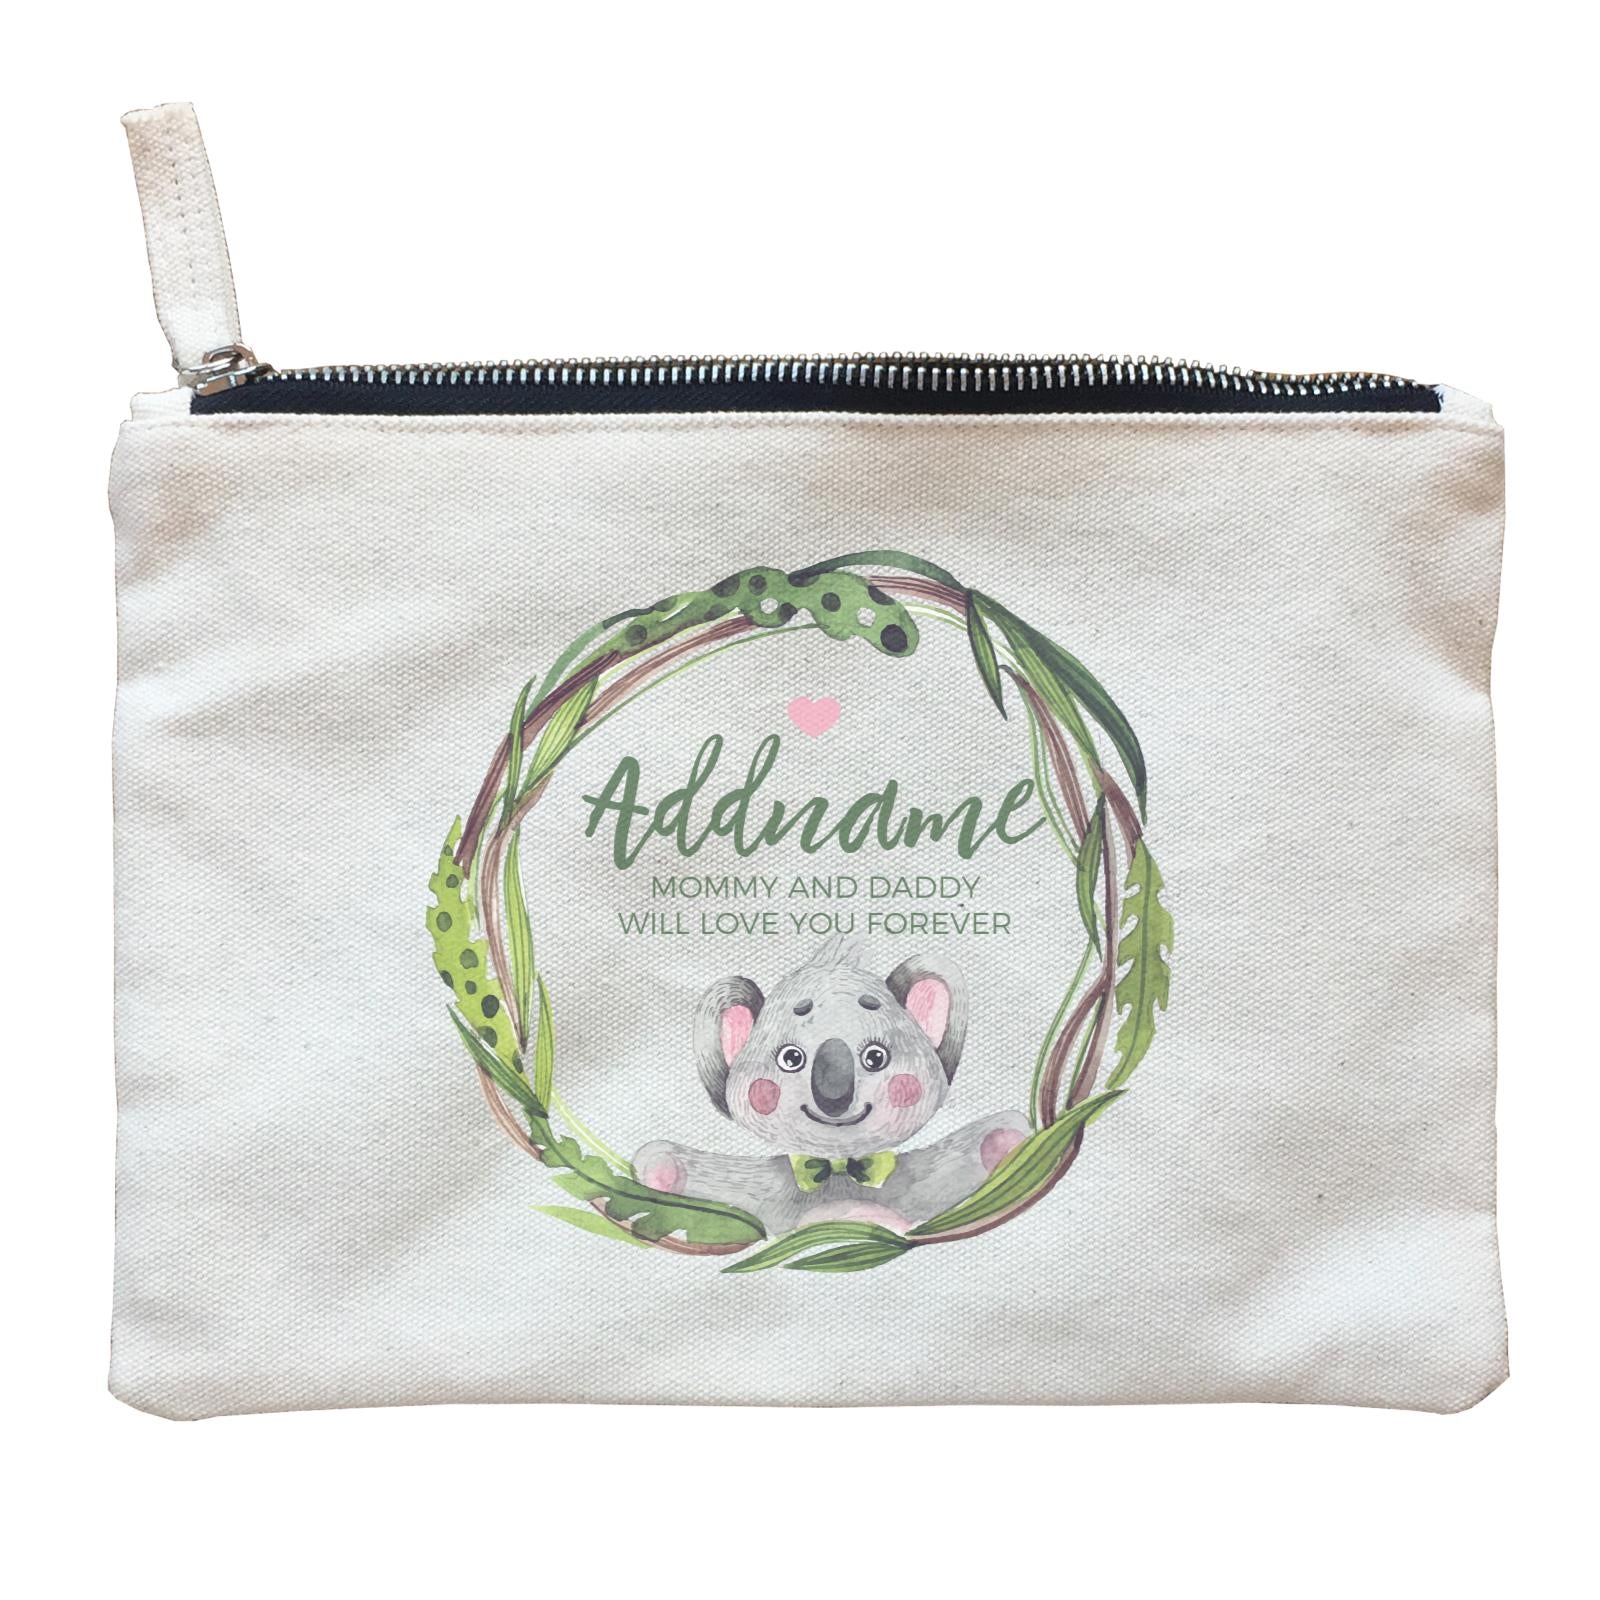 Watercolour Pink Koala Green Leaves Wreath Personalizable with Name and Text Zipper Pouch